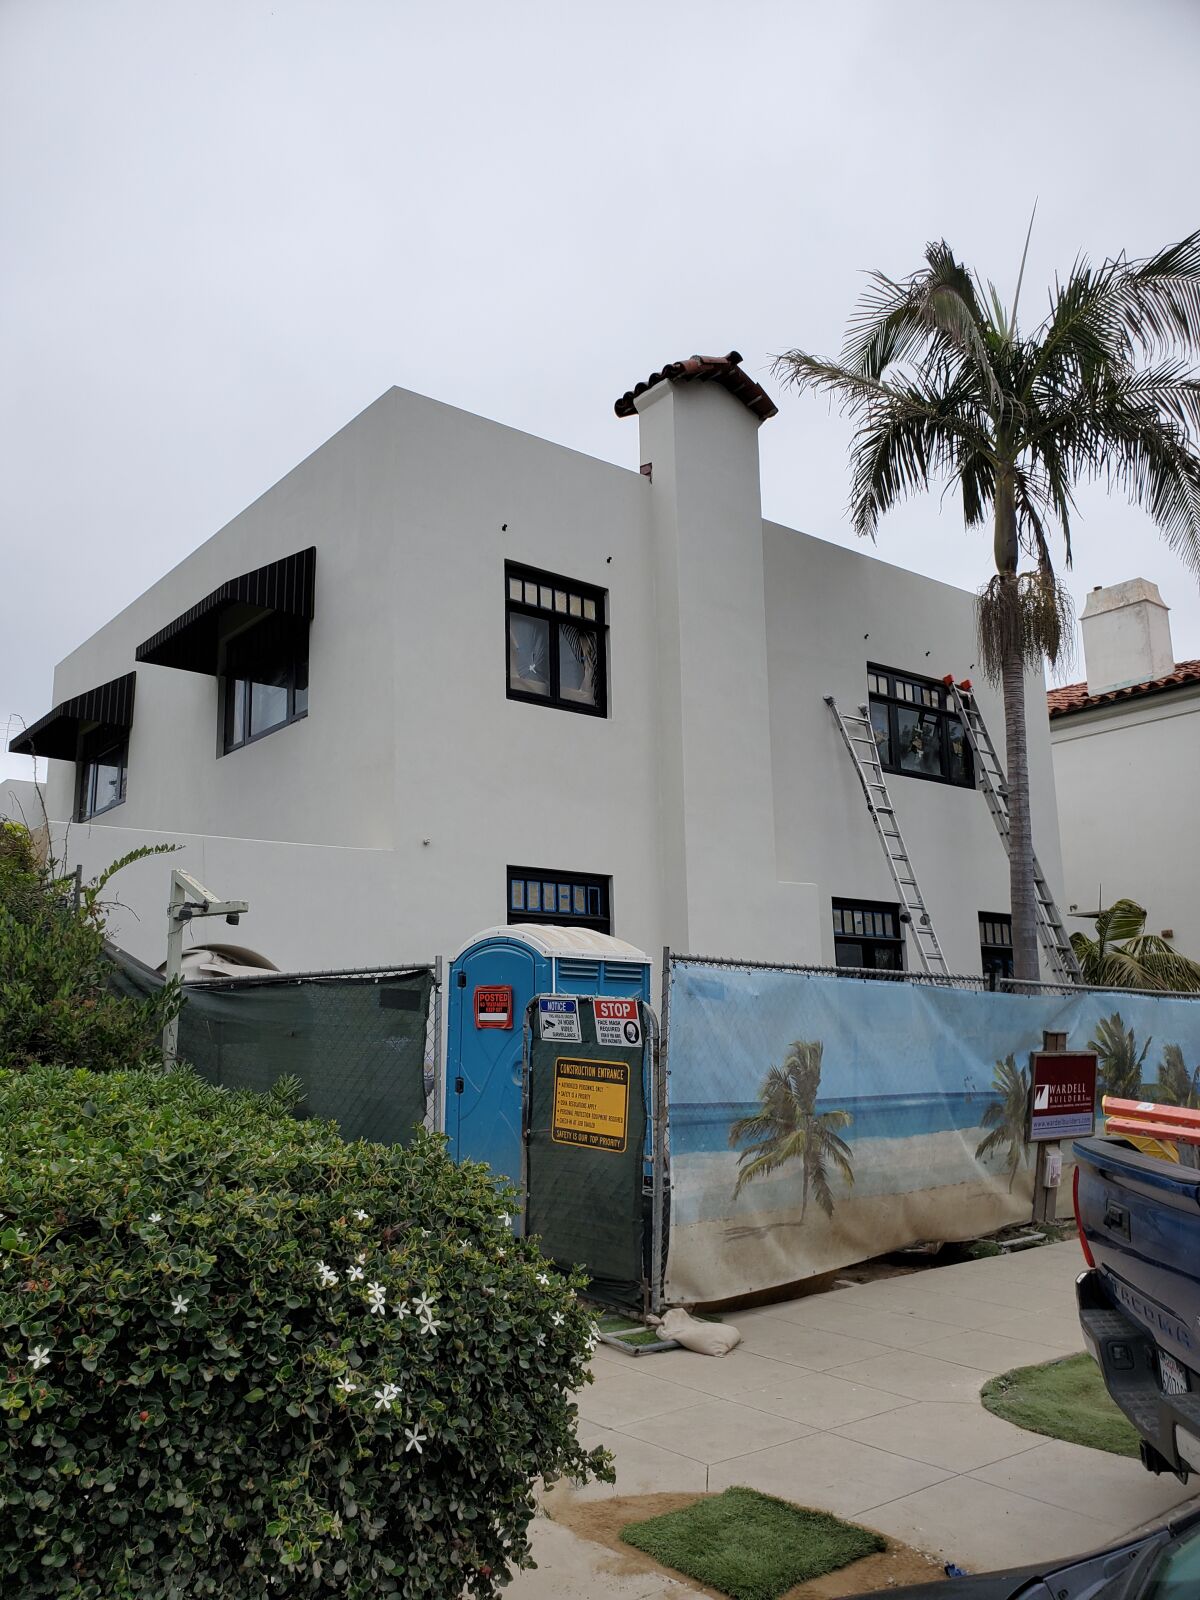 The Orli hotel is in development at 7753 Draper Ave., former site of the Bed & Breakfast Inn at La Jolla.